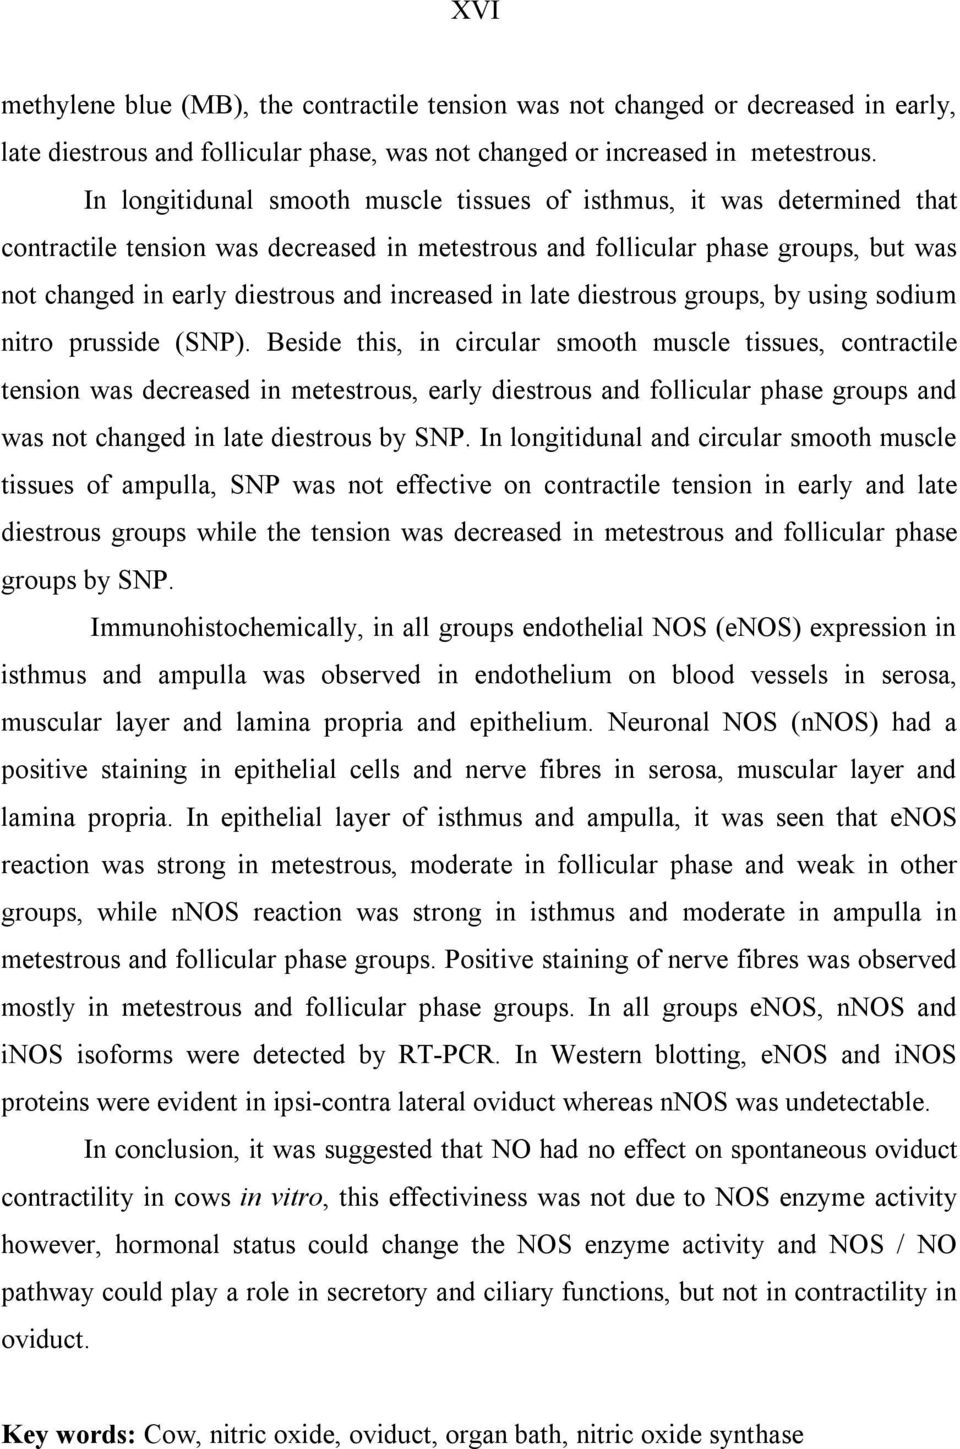 diestrous groups, by using sodium nitro prusside (SNP).